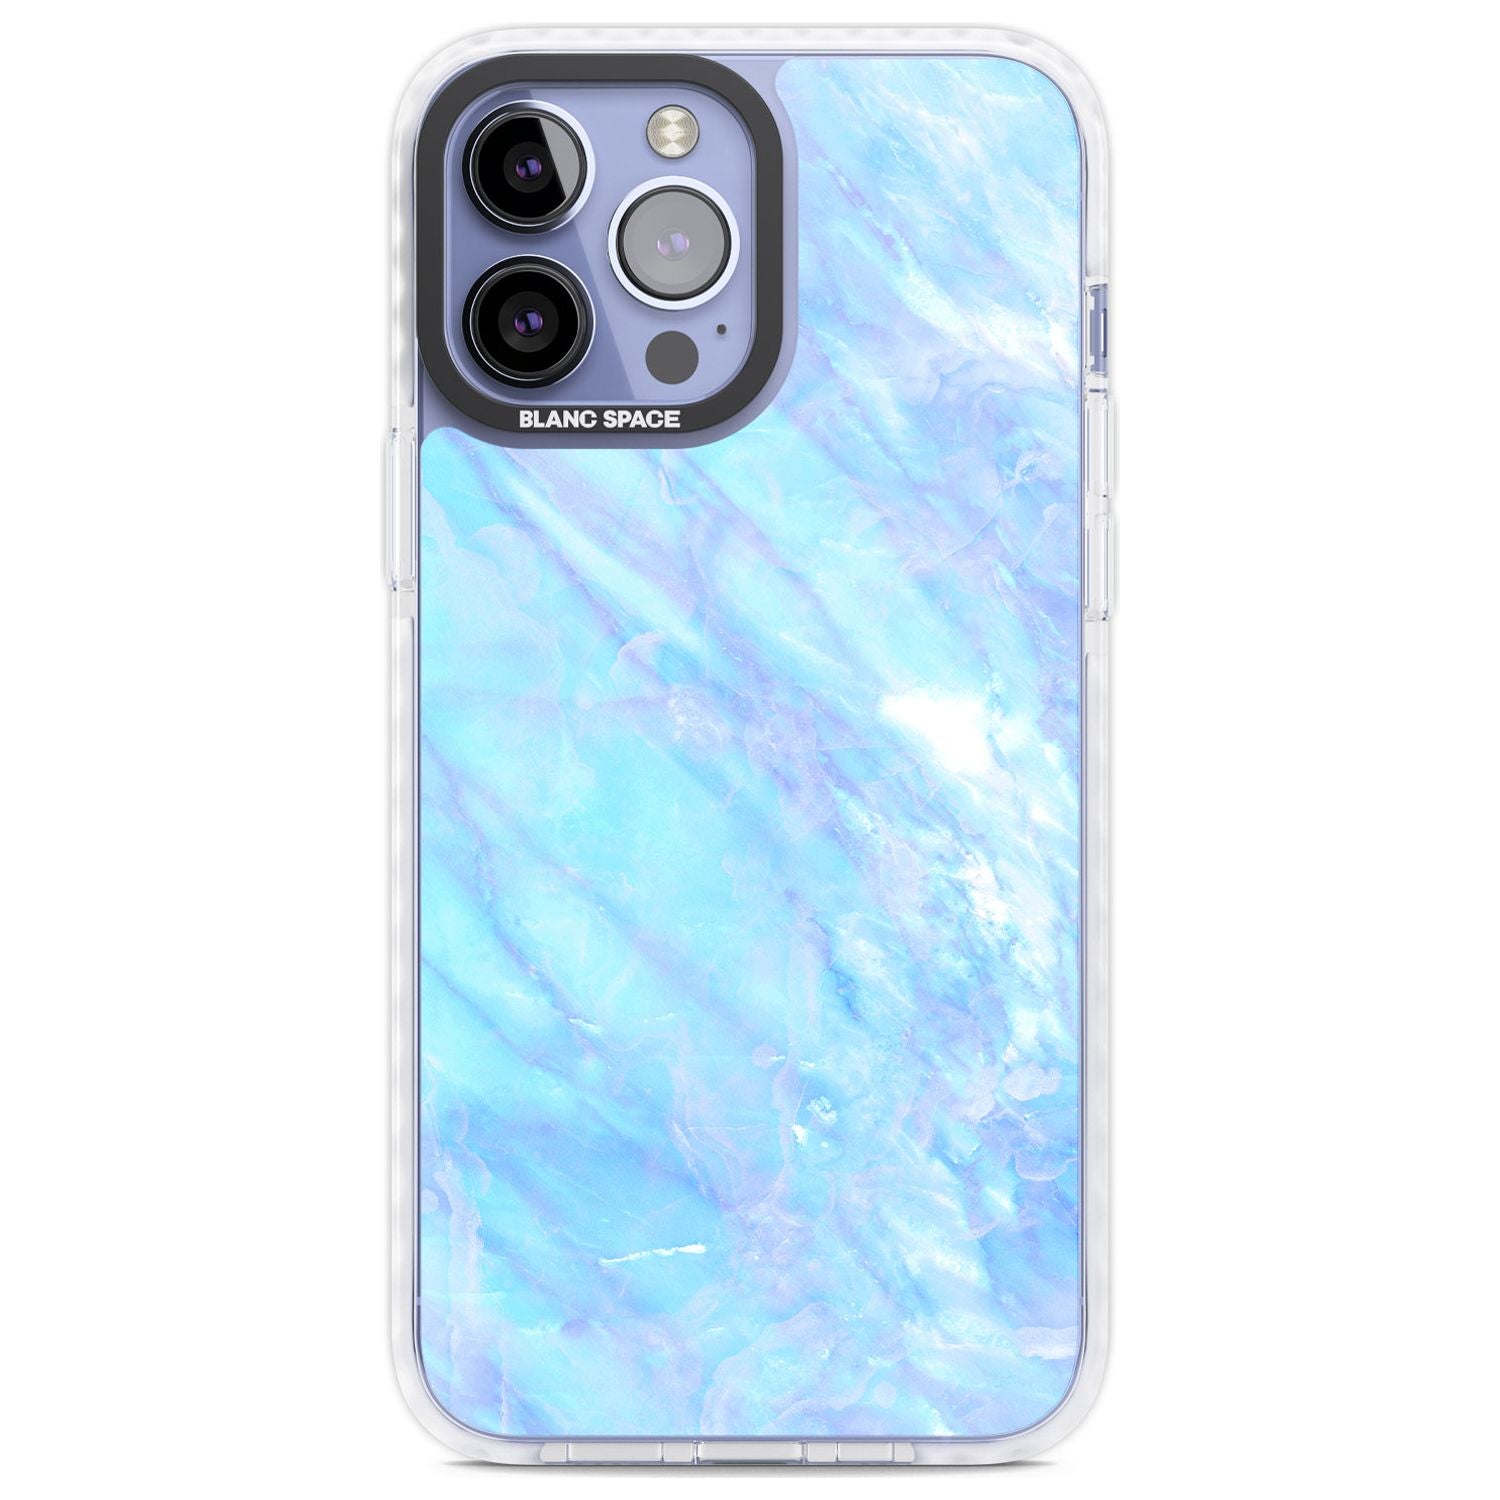 Iridescent Crystal Marble Phone Case iPhone 13 Pro Max / Impact Case,iPhone 14 Pro Max / Impact Case Blanc Space